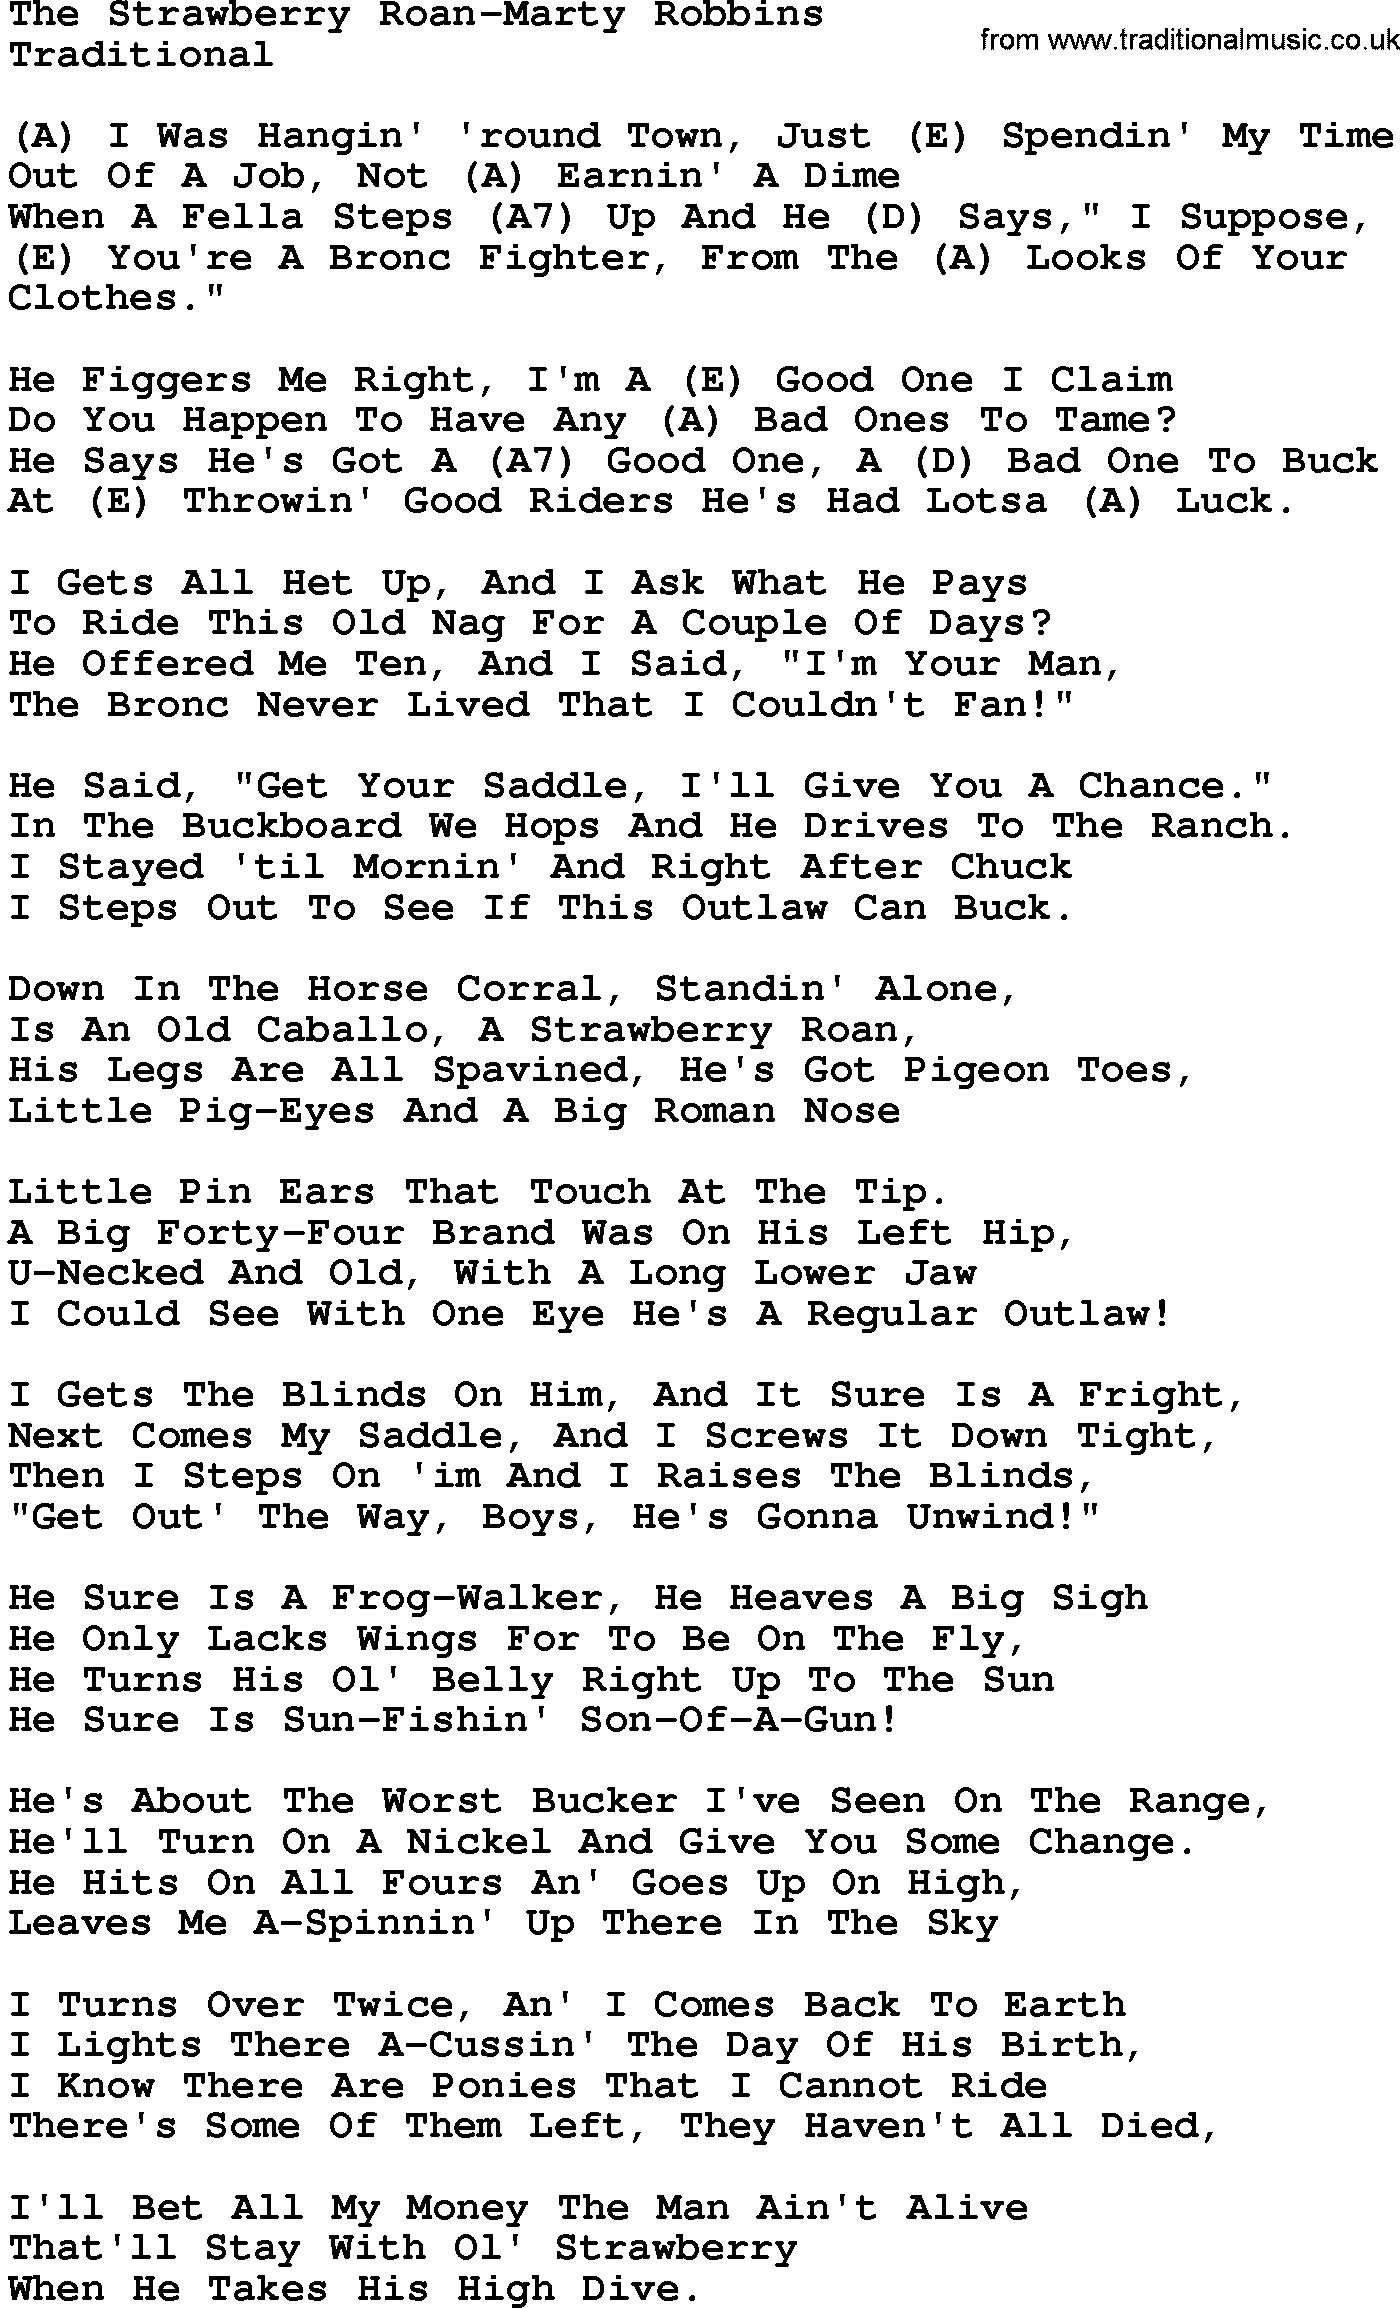 Country music song: The Strawberry Roan-Marty Robbins lyrics and chords